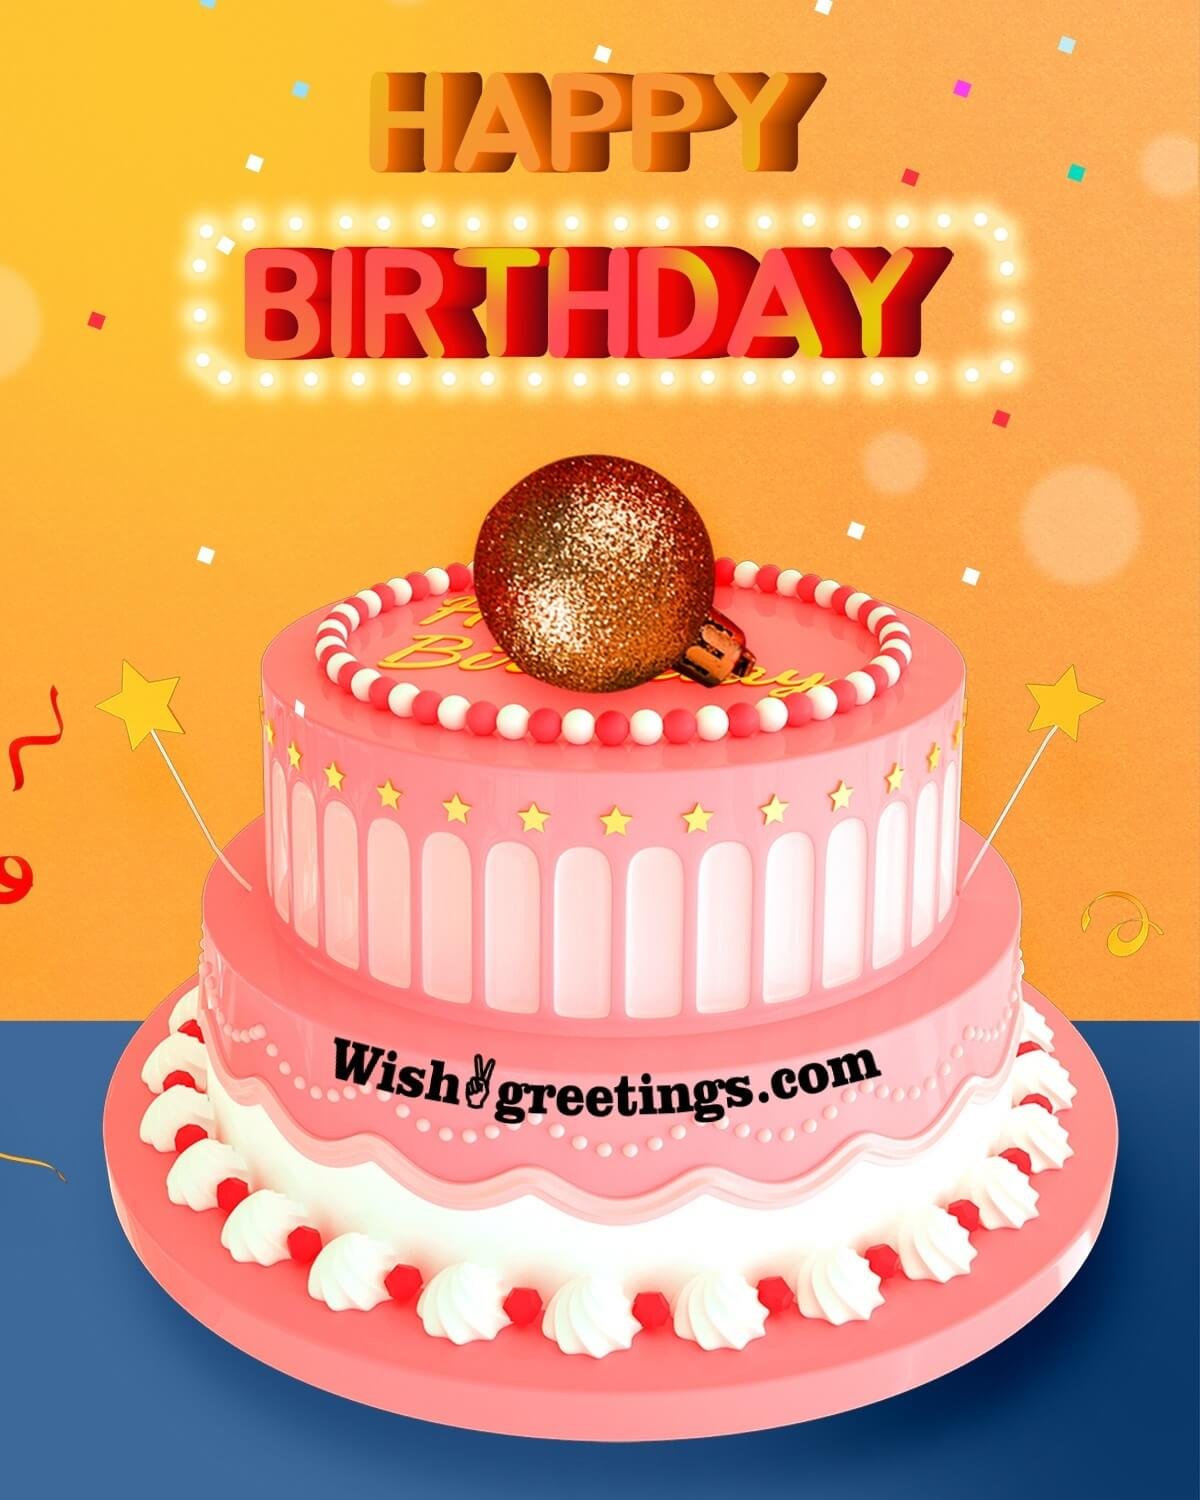 Stunning Compilation of Over 999 Birthday Cake Wishes Images in High ...